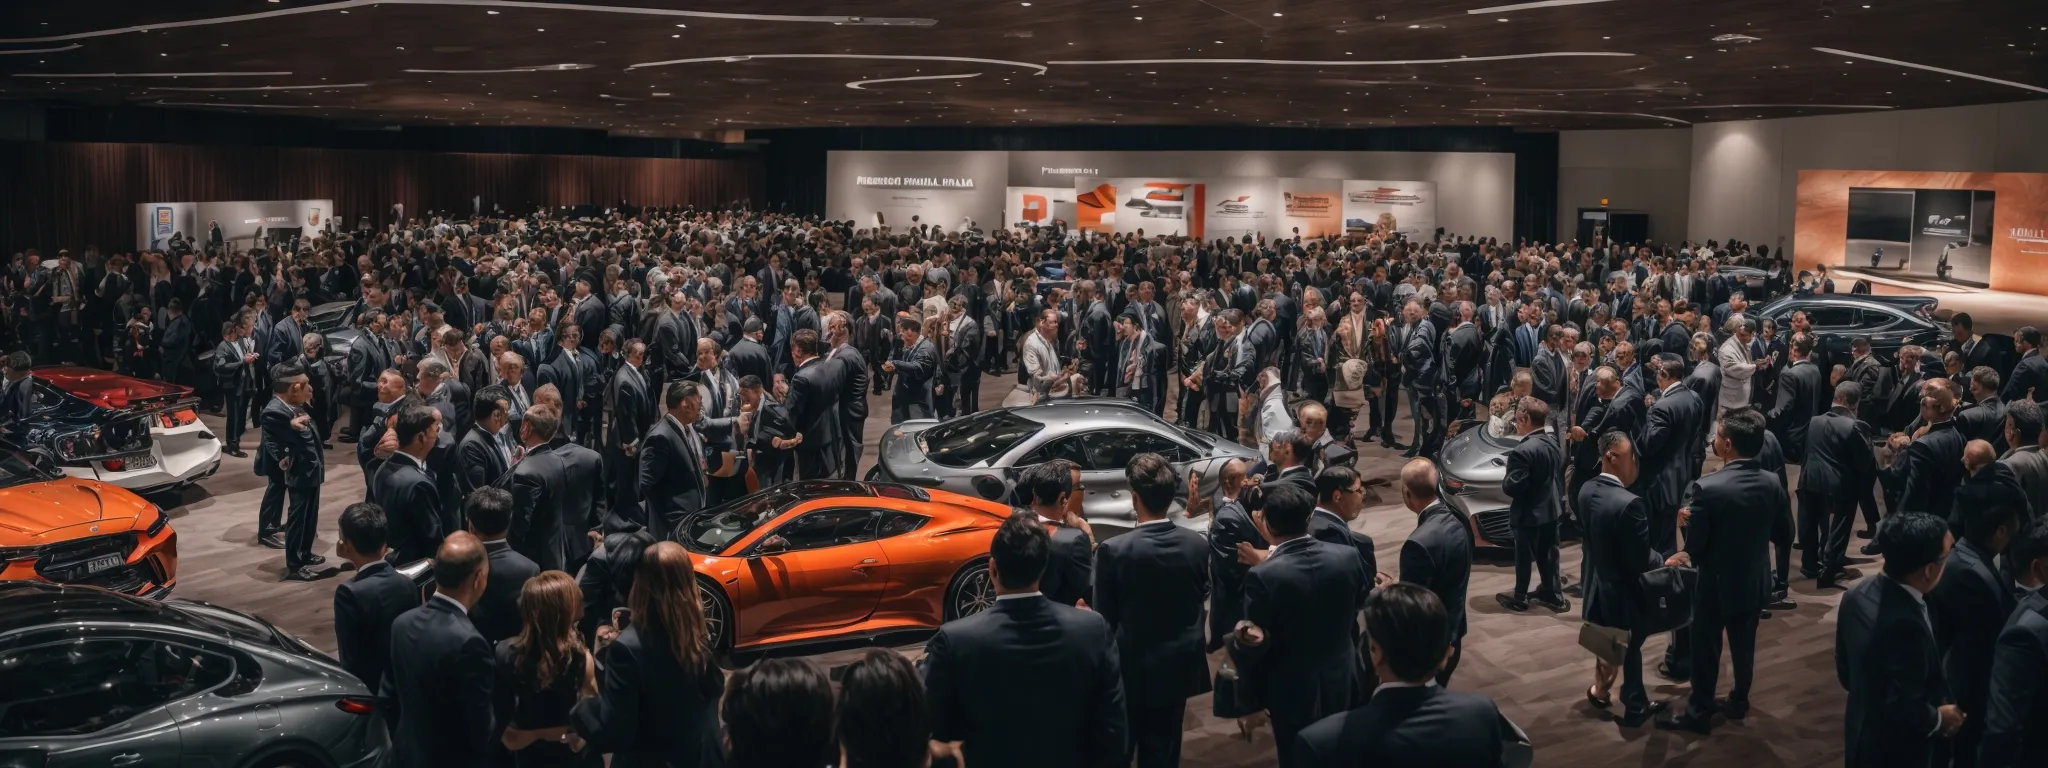 a bustling automotive conference with various industry professionals networking and sharing insights.